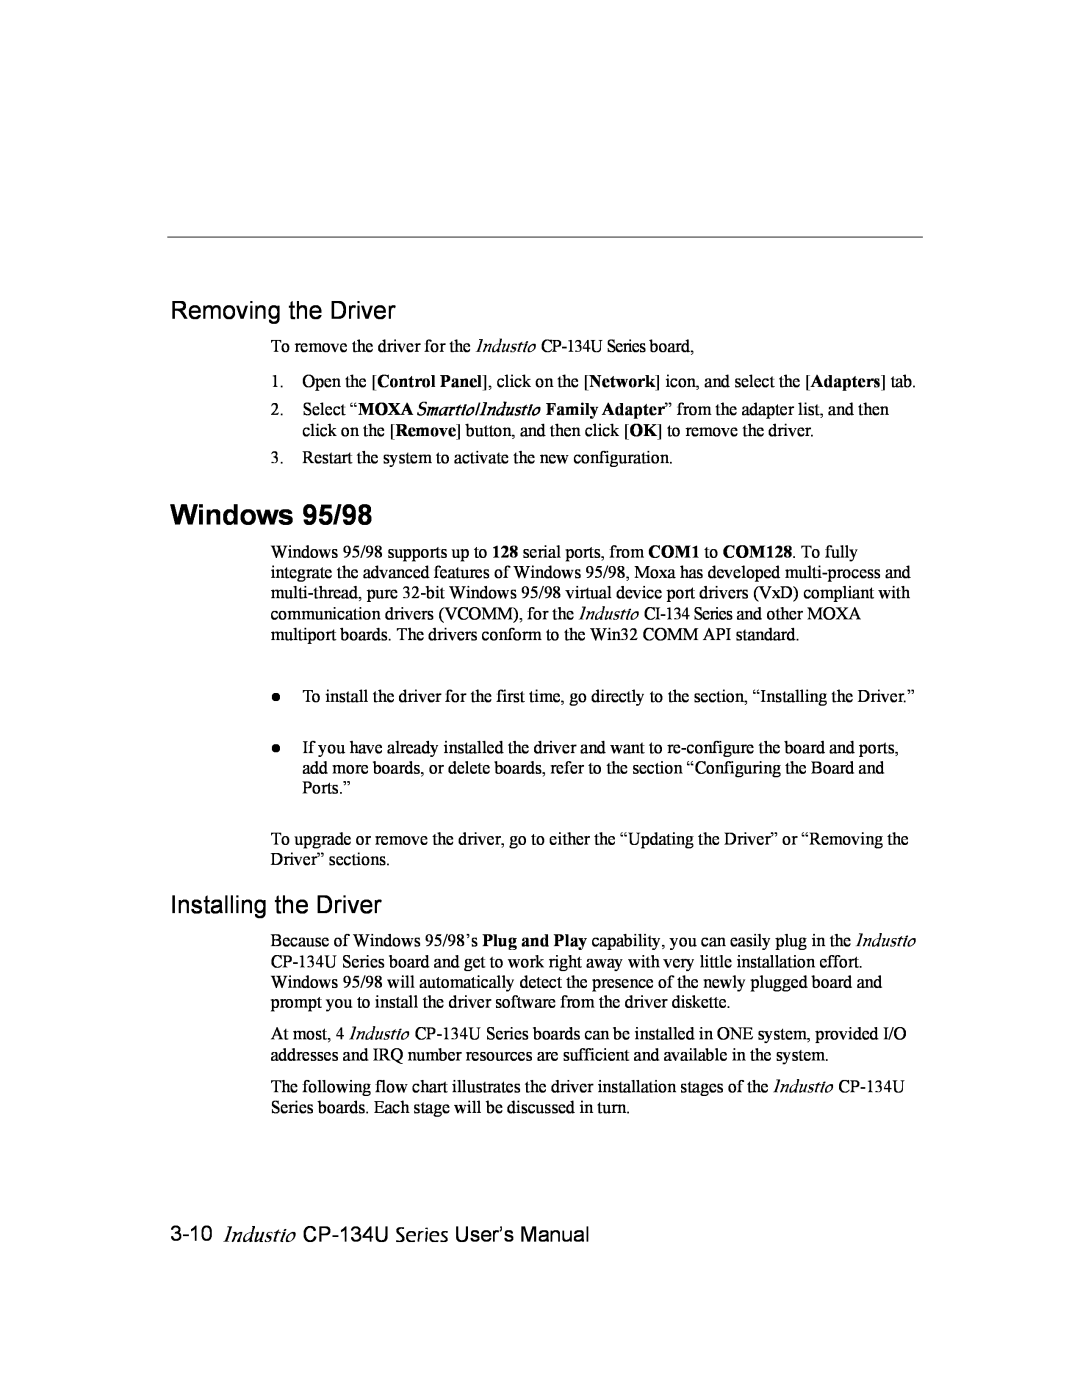 Moxa Technologies Windows 95/98, Removing the Driver, Industio CP-134U Series User’s Manual, Installing the Driver 